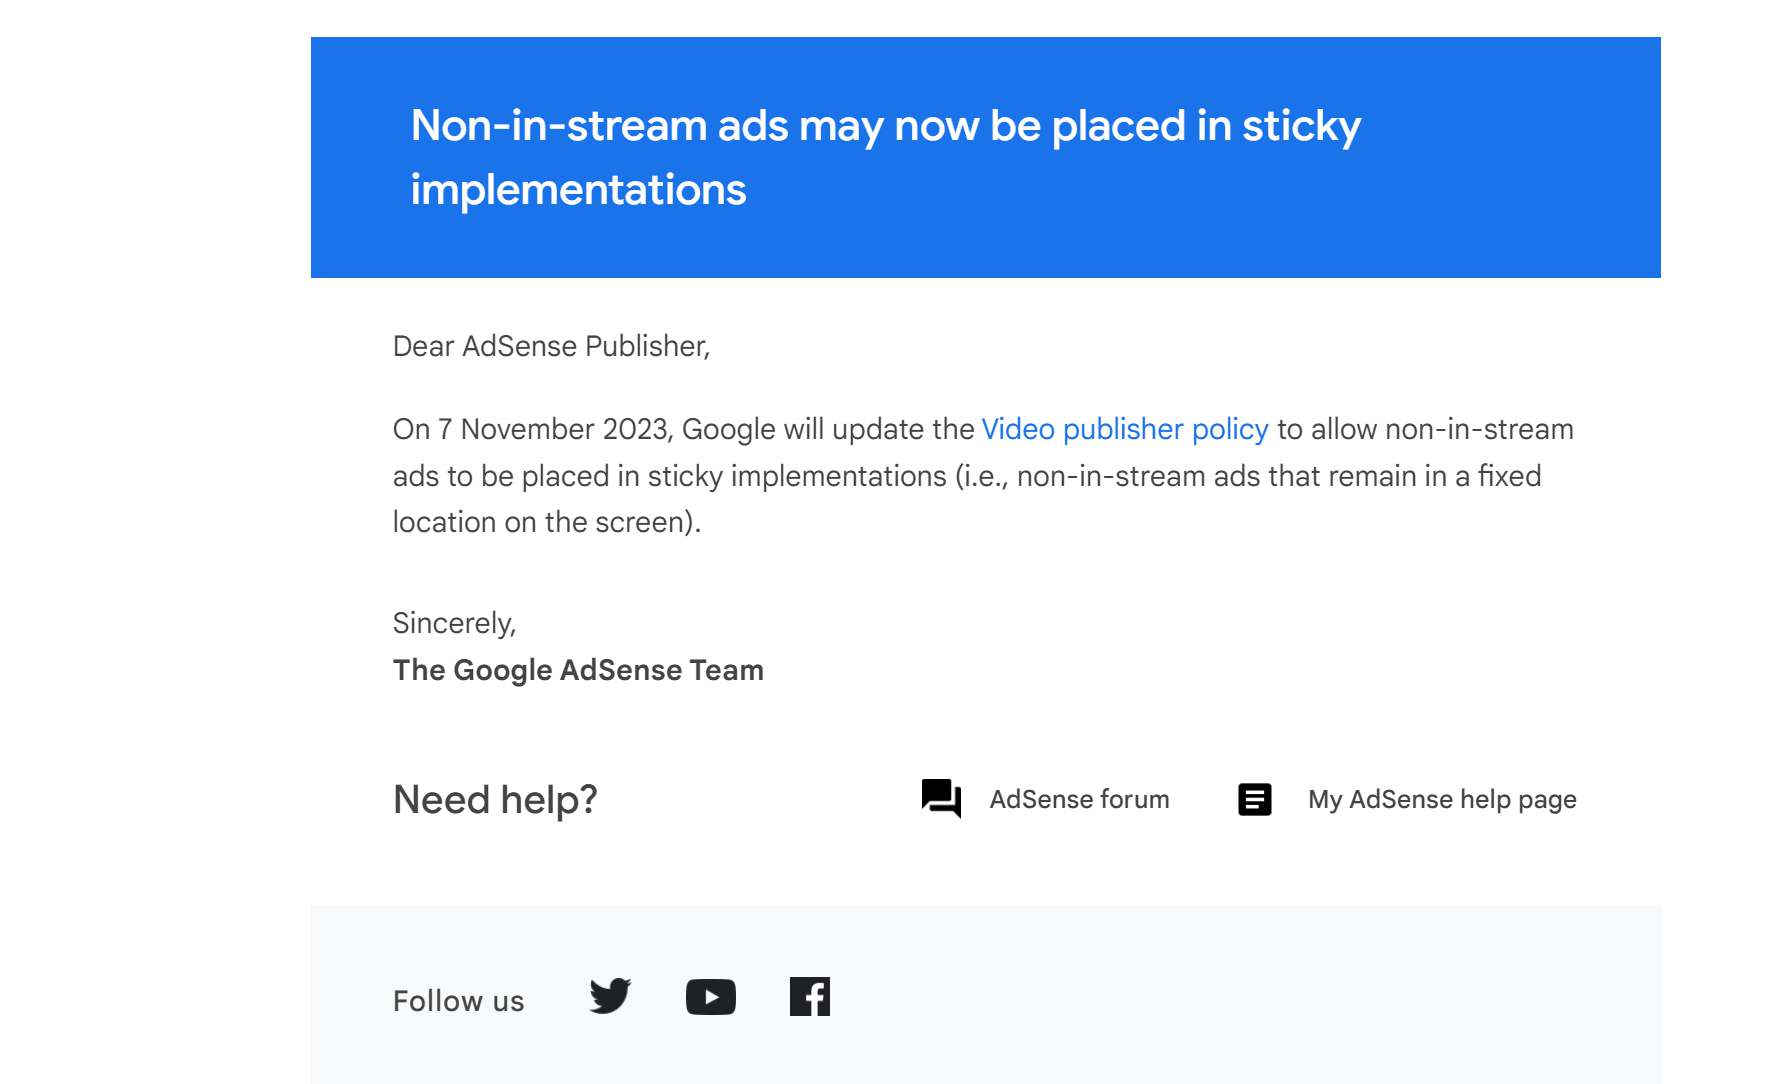 Google AdSense Non-in-stream ads may now be placed in sticky implementations - Dear AdSense Publisher